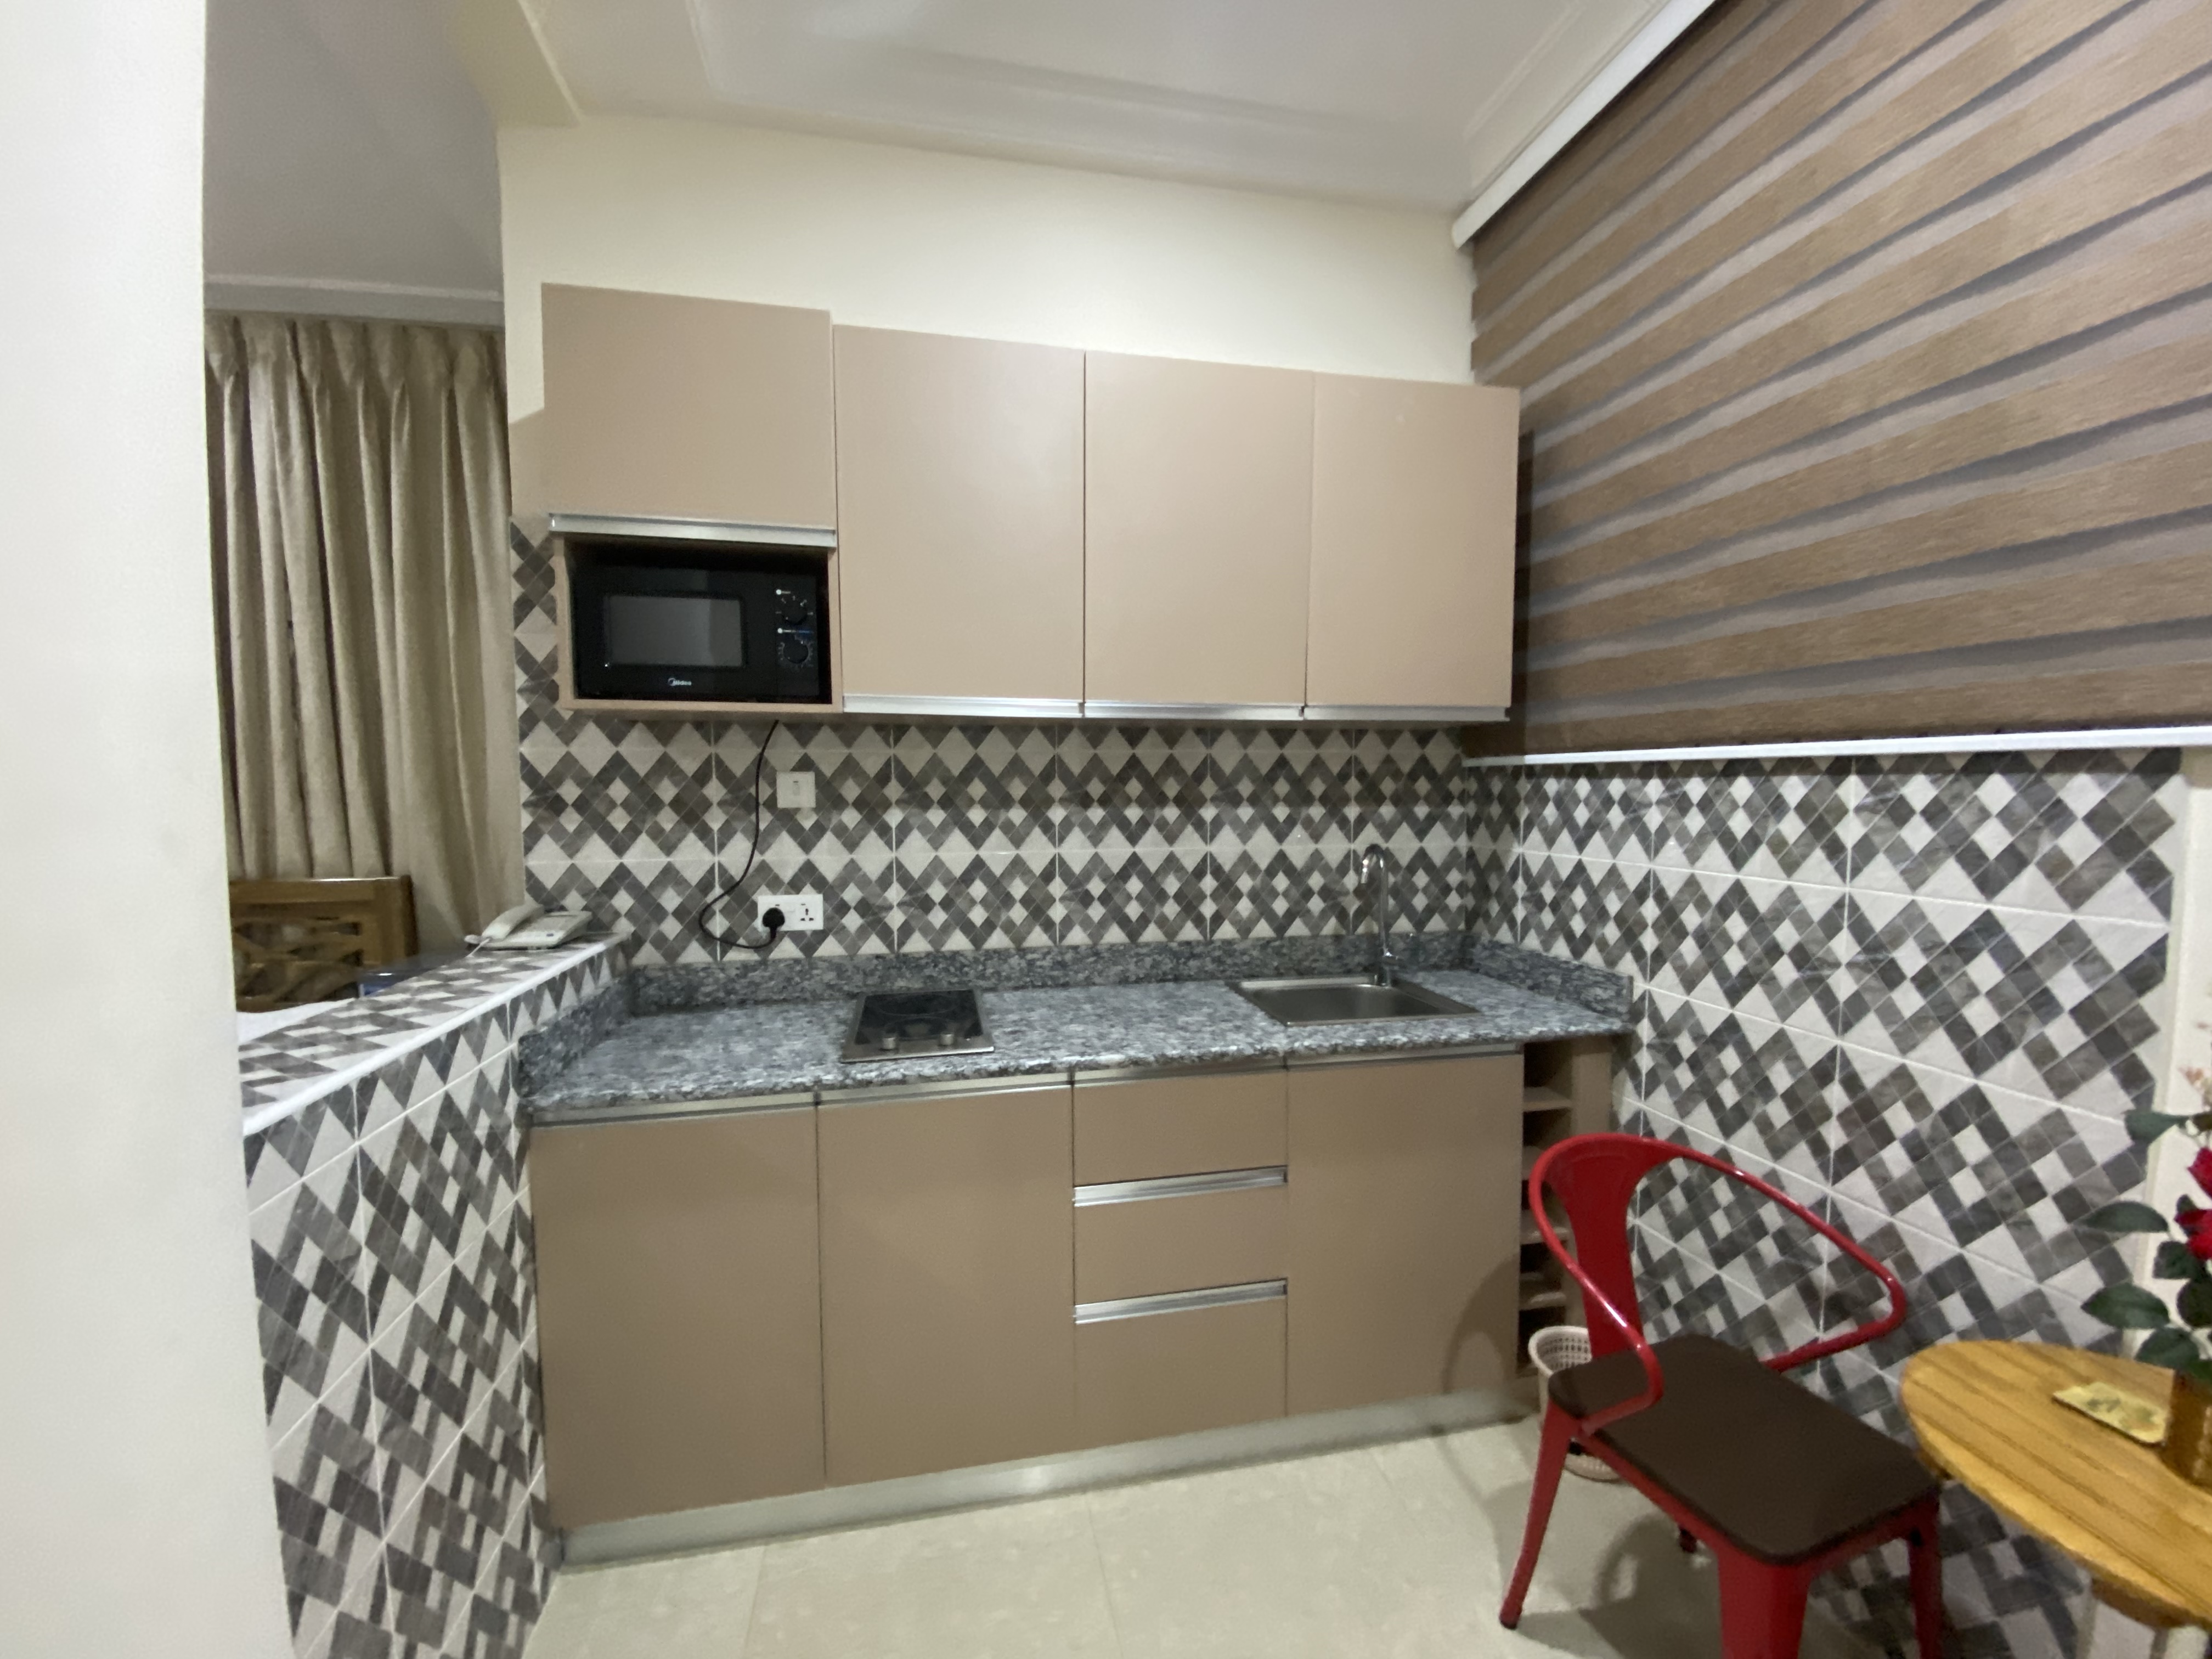 One 1-bedroom Furnished Apartment for Rent at Tse Addo